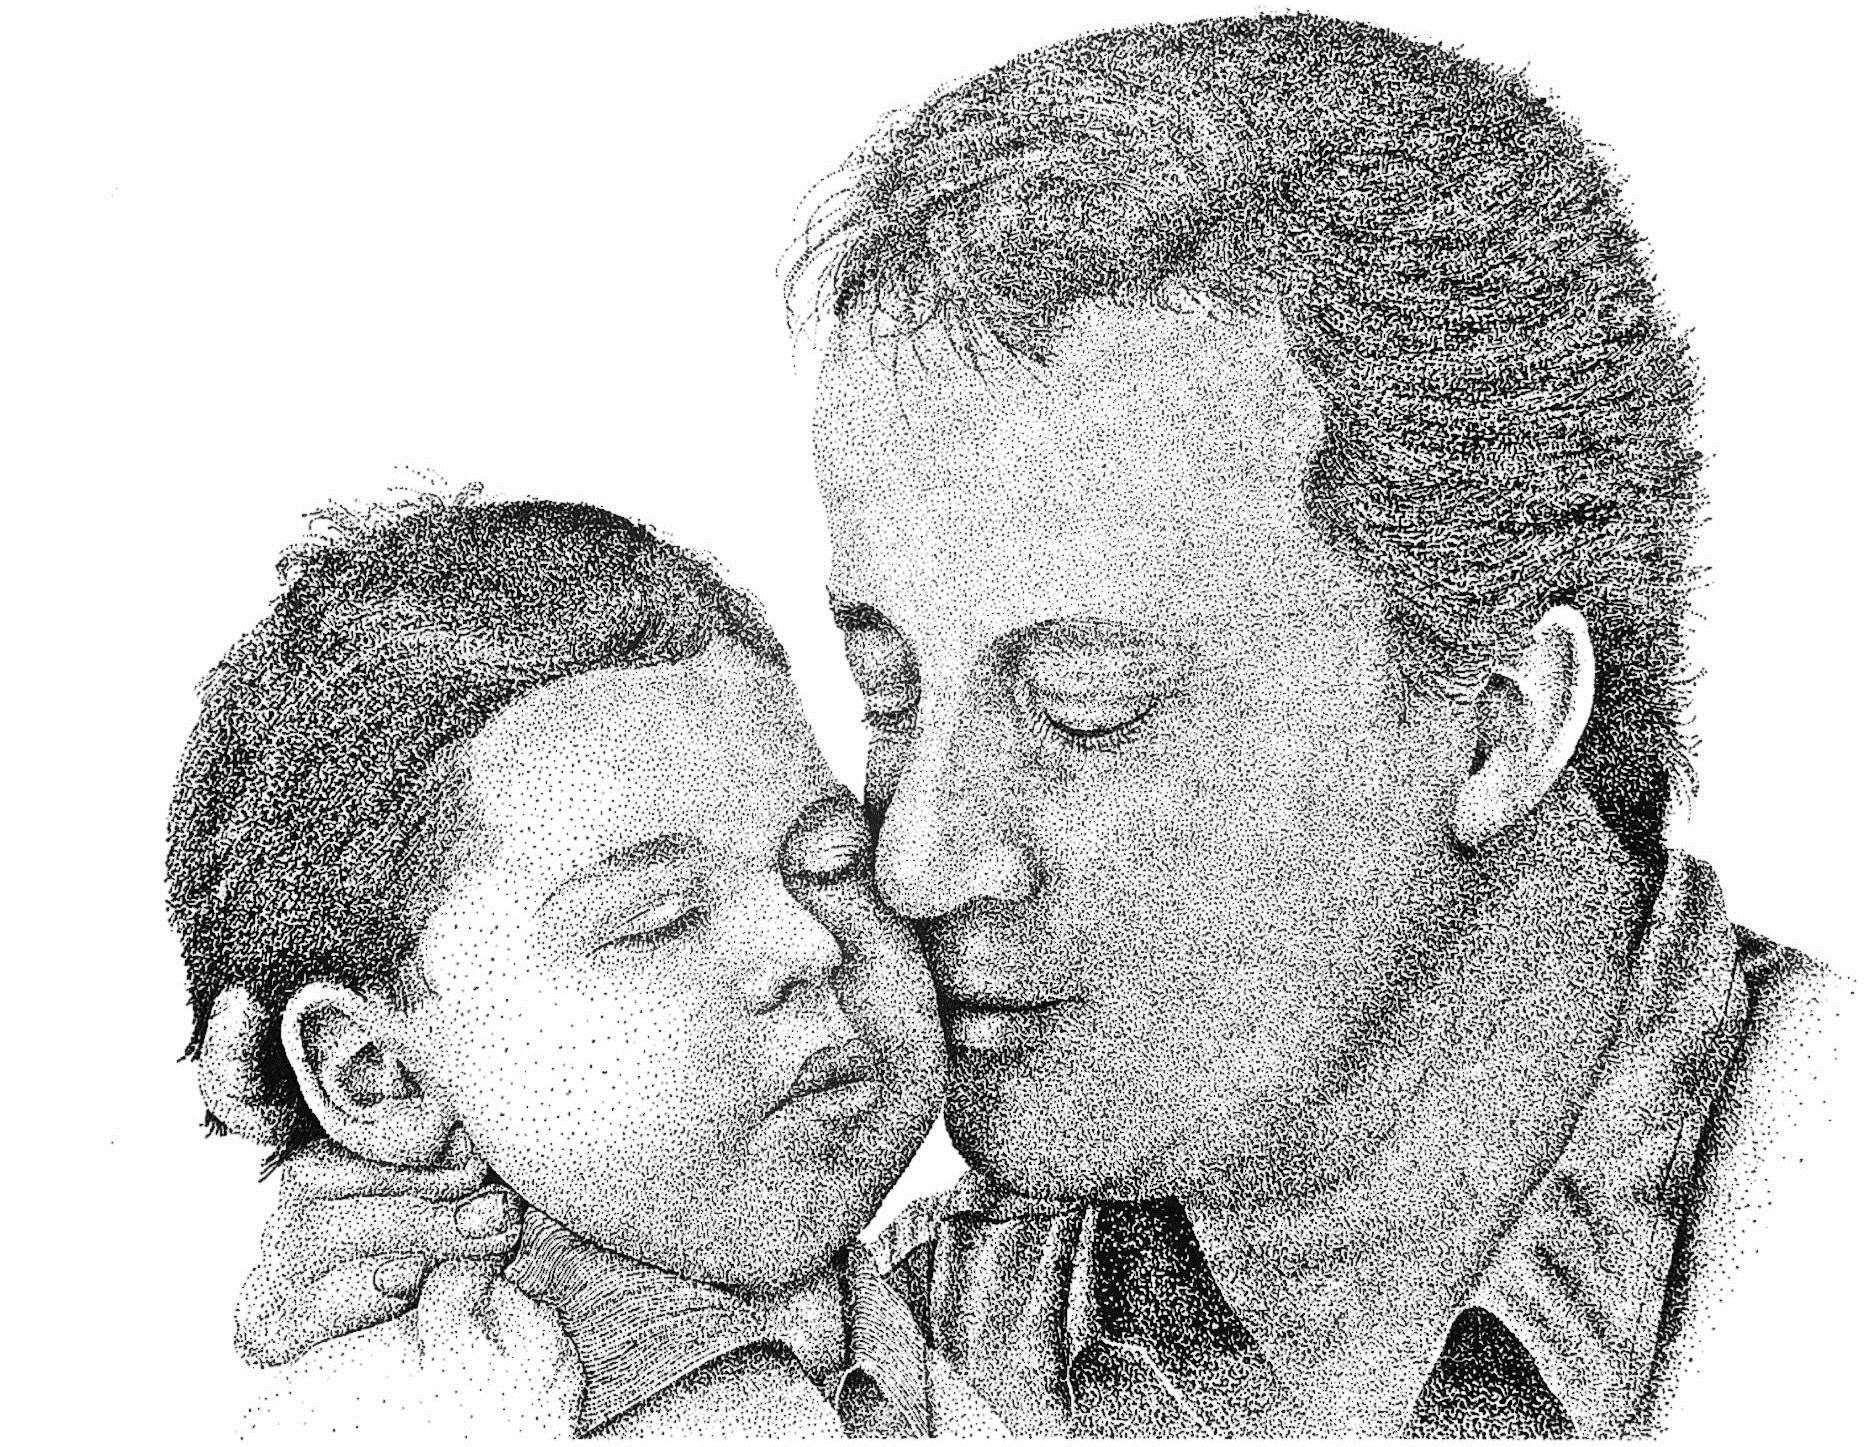 The stroke survivor was able to draw David Cameron and his son Ivan by dotting the paper. Picture: John Kingdon